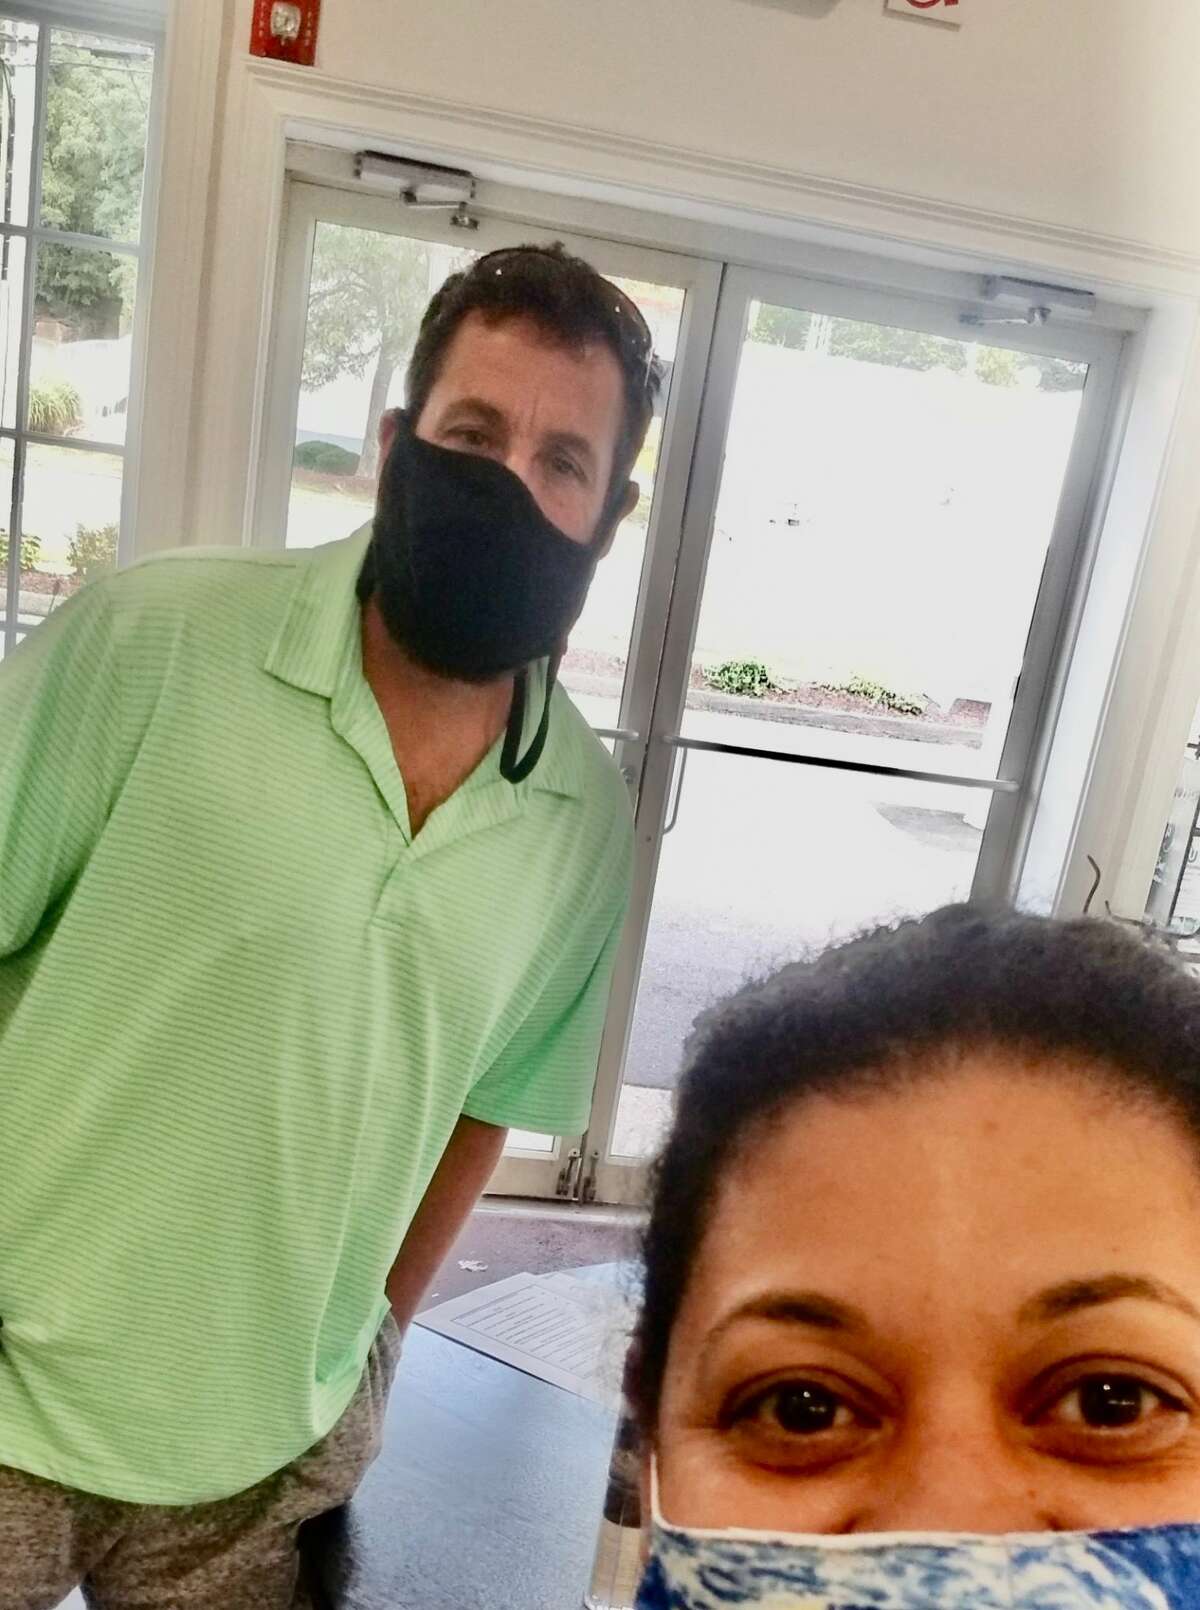 Adam Sandler and Marisol Ballejo at Fred 06825 in Fairfield to pick up food on Sept. 28, 2020. Sandler was passing through with his parents on his way to Philadelphia and arrived at the deli around 2 p.m. to pick up food with which he planned to break his Yom Kippur fast, according to owner Fred Kaskowitz. He entered alone wearing a black mask and ordered turkey meatballs, sweet and sour peppers and panko-crusted chicken; Kaskowitz said they threw in a free brownie for "good luck."  